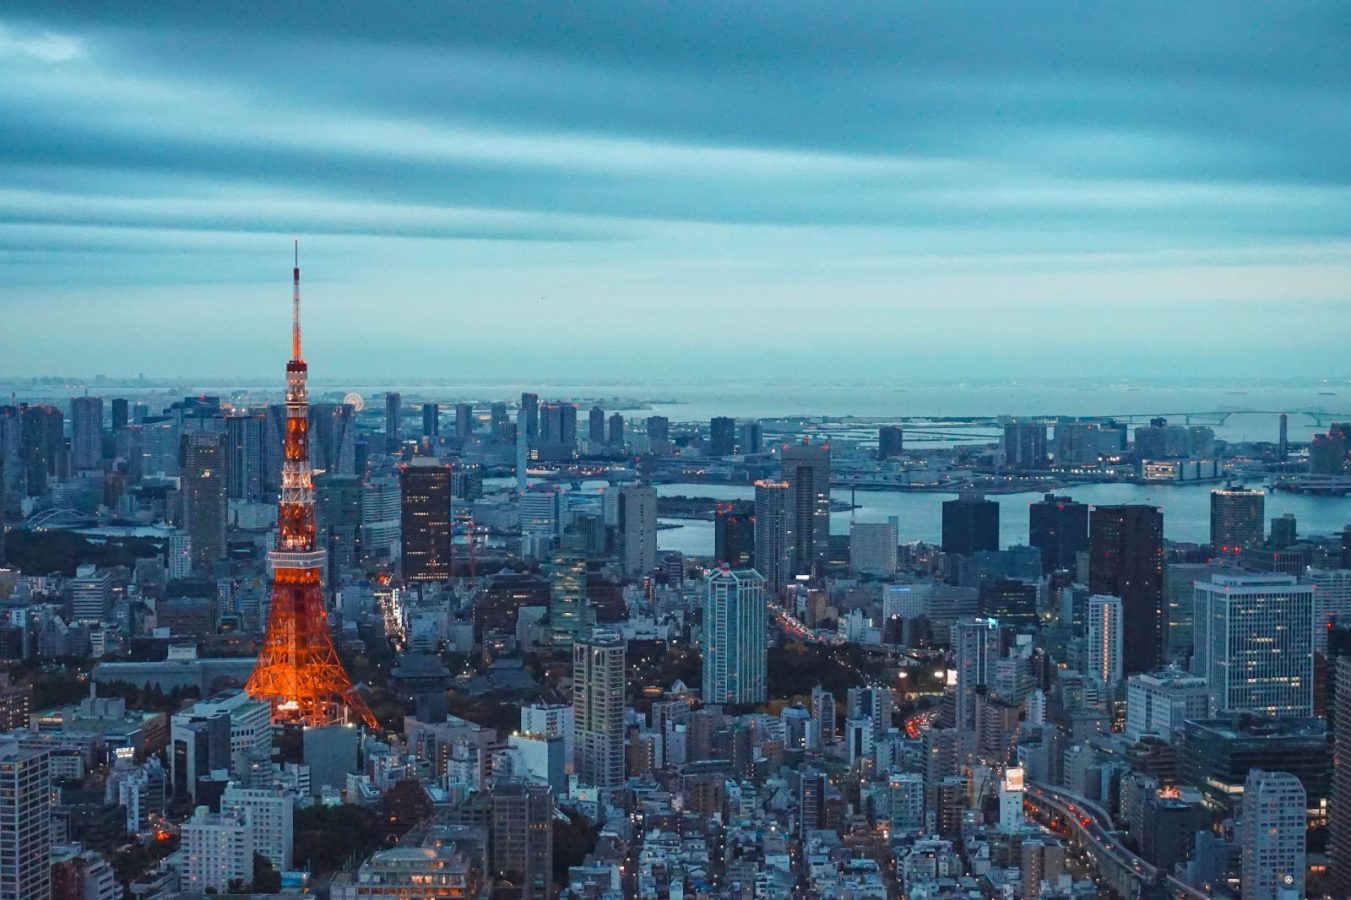 A blue/grey sky with Tokyo tower lit red on the left and surrounded by the skyline of Tokyo, Japan - the destination to travel to for Business majors.